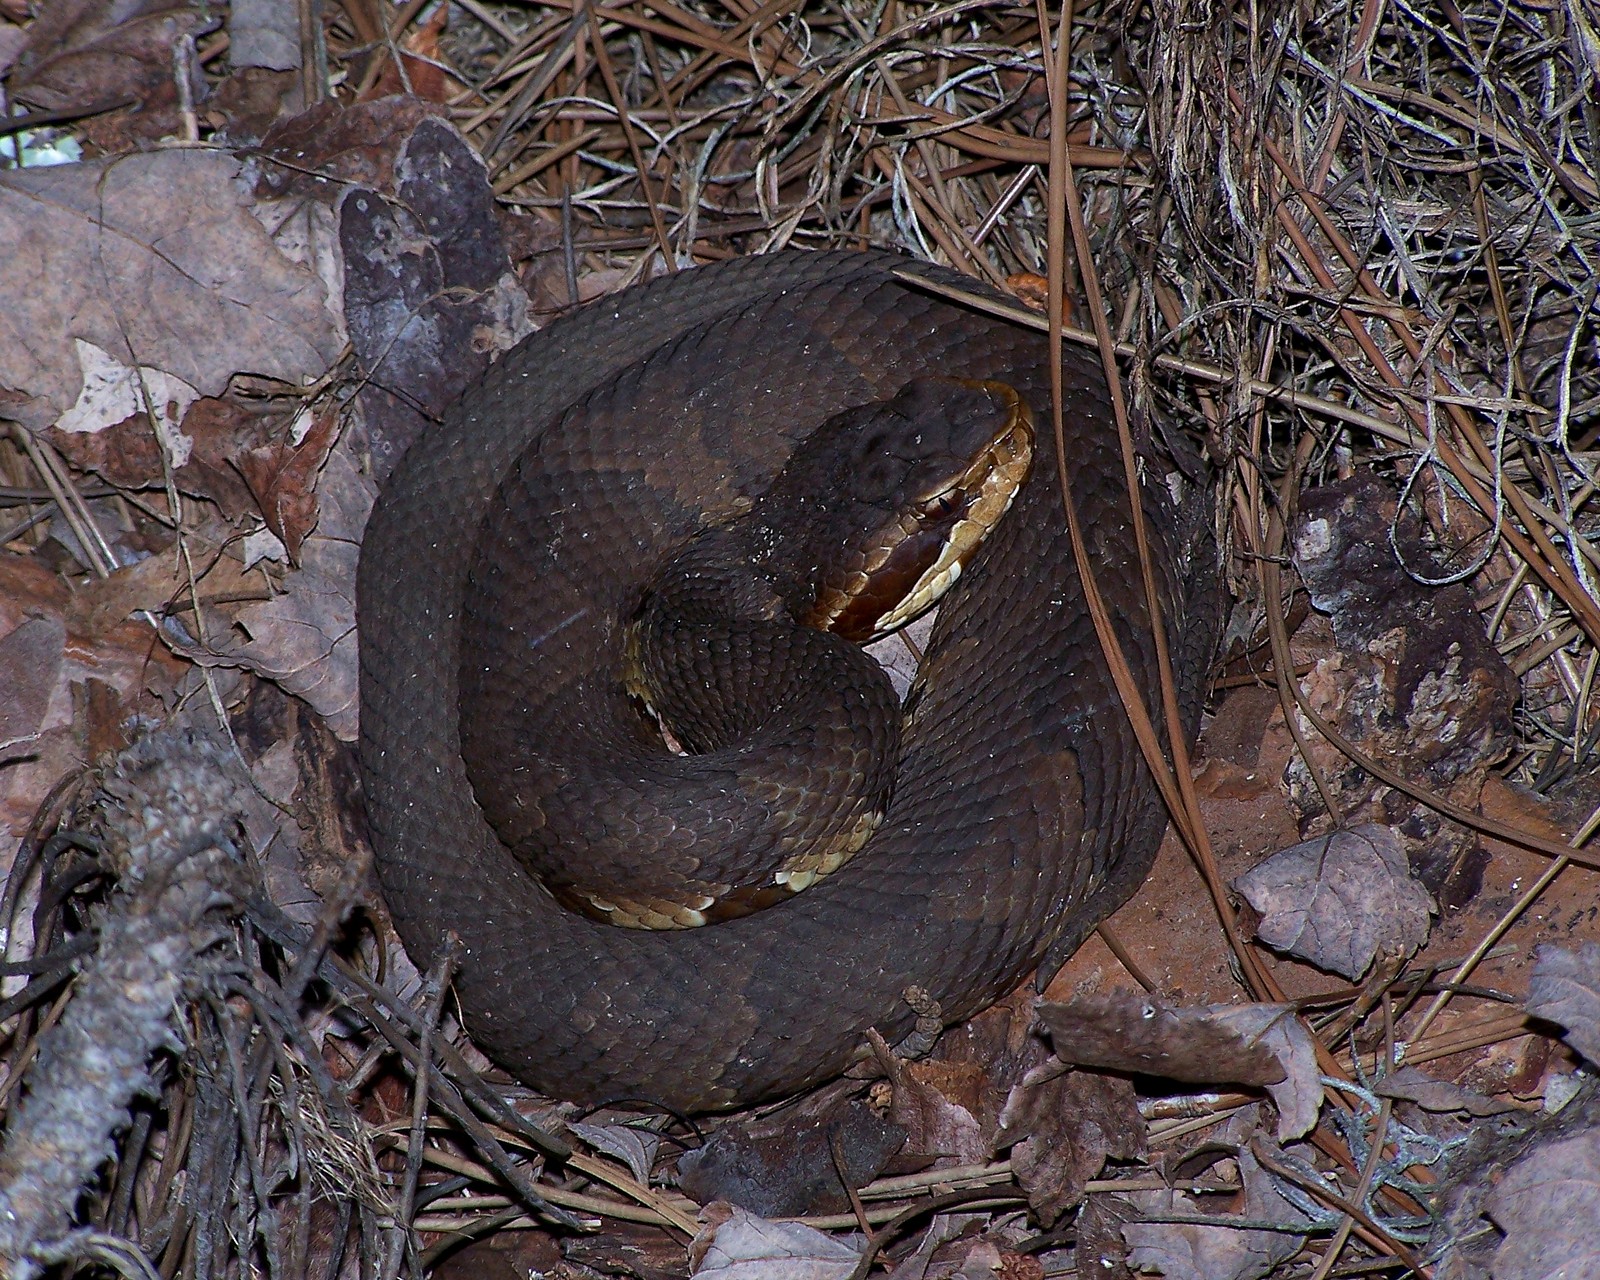 Coiled Cottonmouth Snake